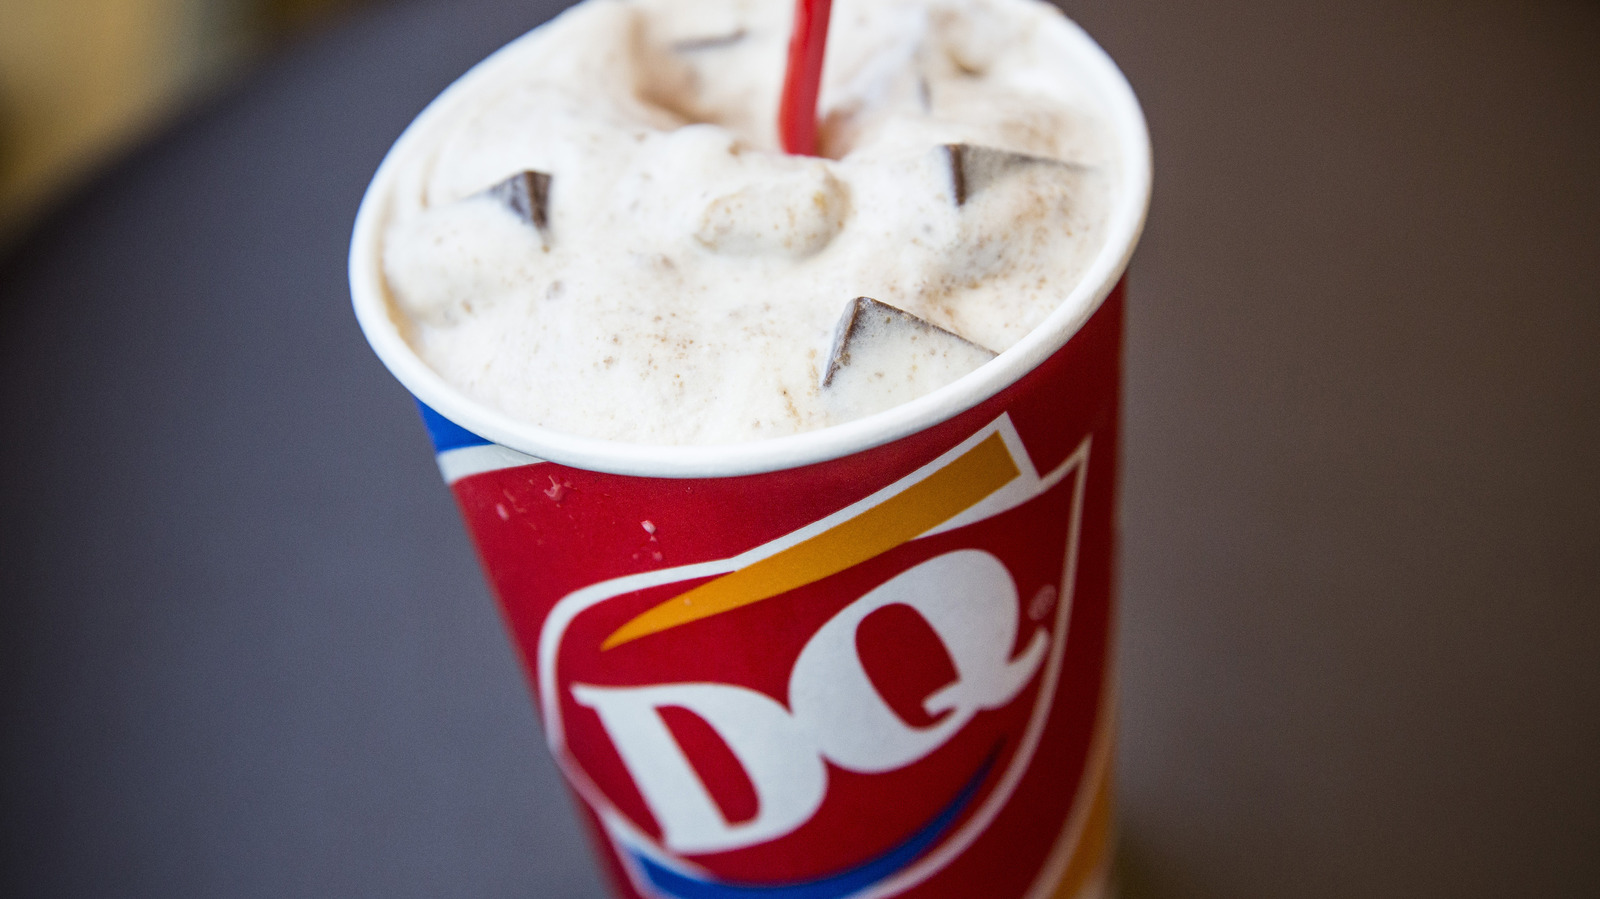 Dairy Queen's New Blizzard Features An Unexpected Candy